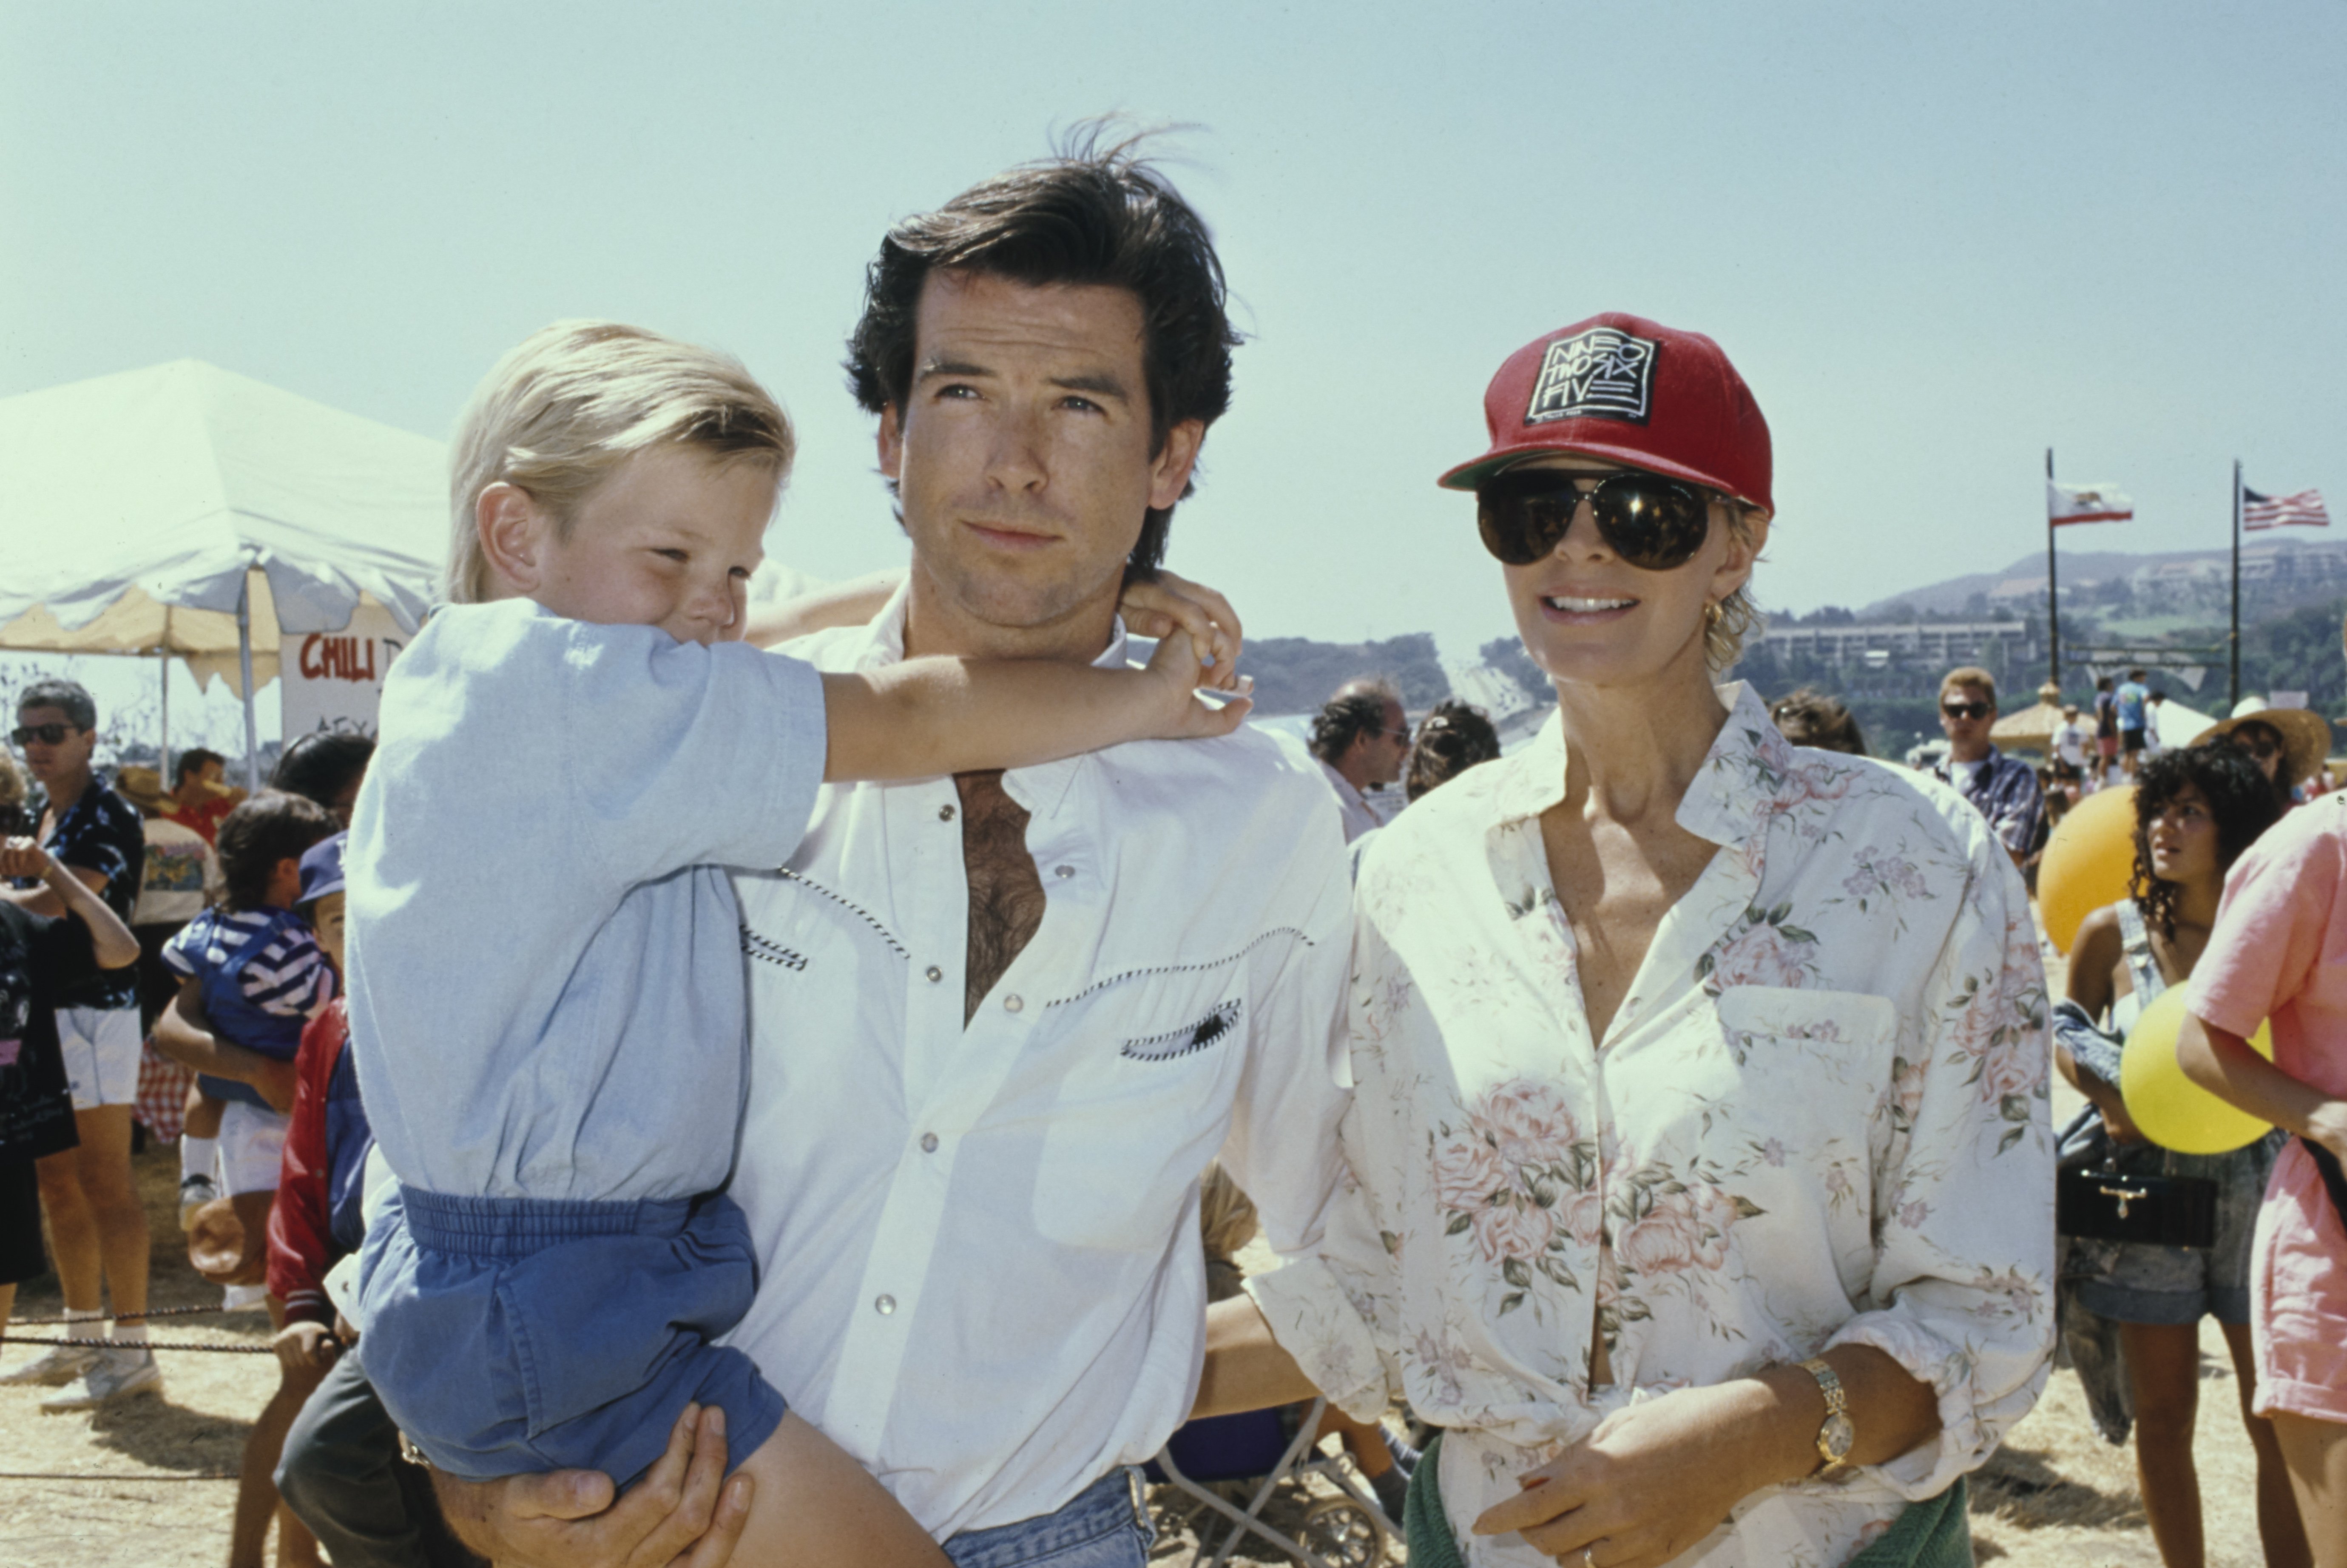 Irish actor Pierce Brosnan with his wife, Australian actress Cassandra Harris and son Sean at the 8th Annual Malibu Kiwanis Chili Cook-off Carnival & Fair, at the Civic Center Area in Malibu, California, 2nd September 1989. | Source: Getty Images